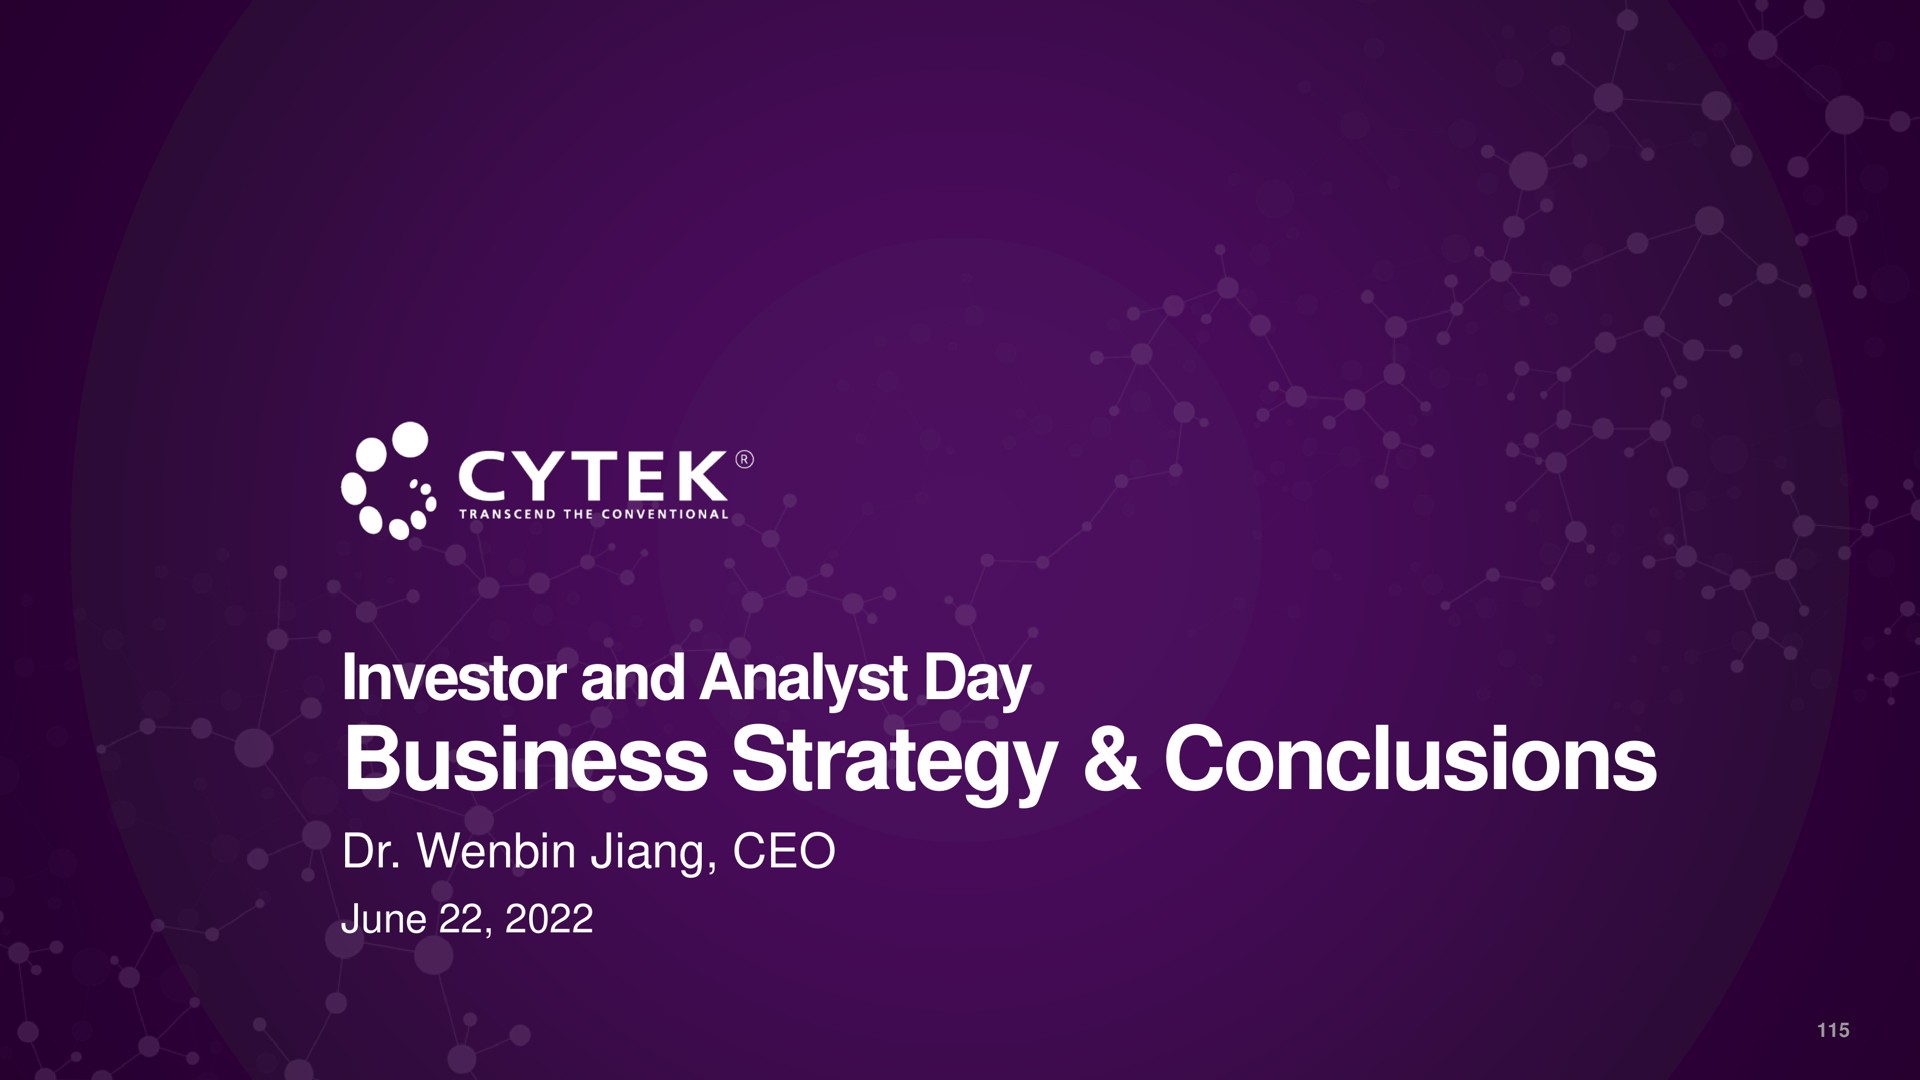 investor and analyst day business strategy conclusions ula | Cytek